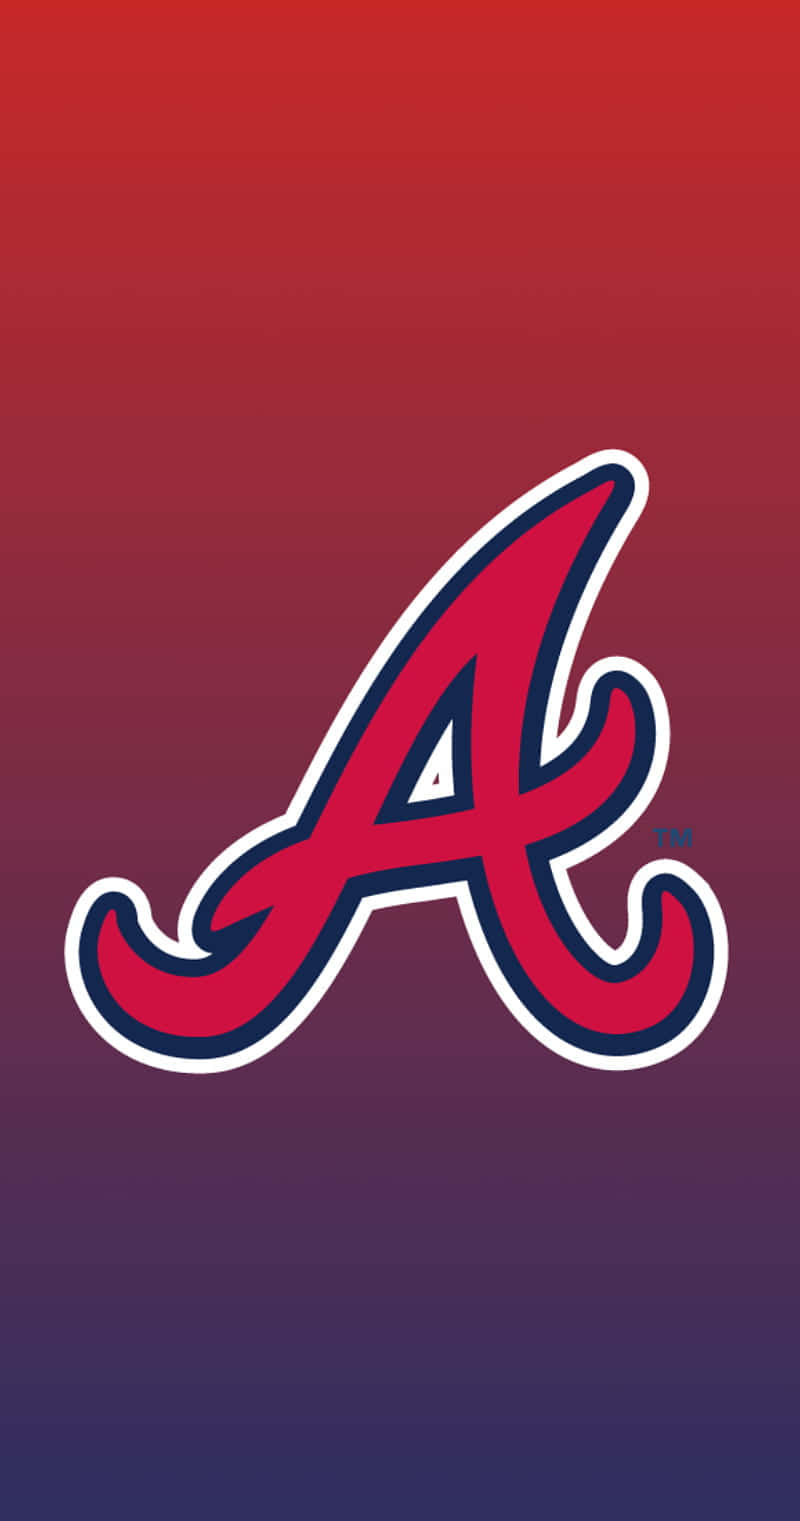 Atlanta Braves Logo On A Red And Blue Background Wallpaper